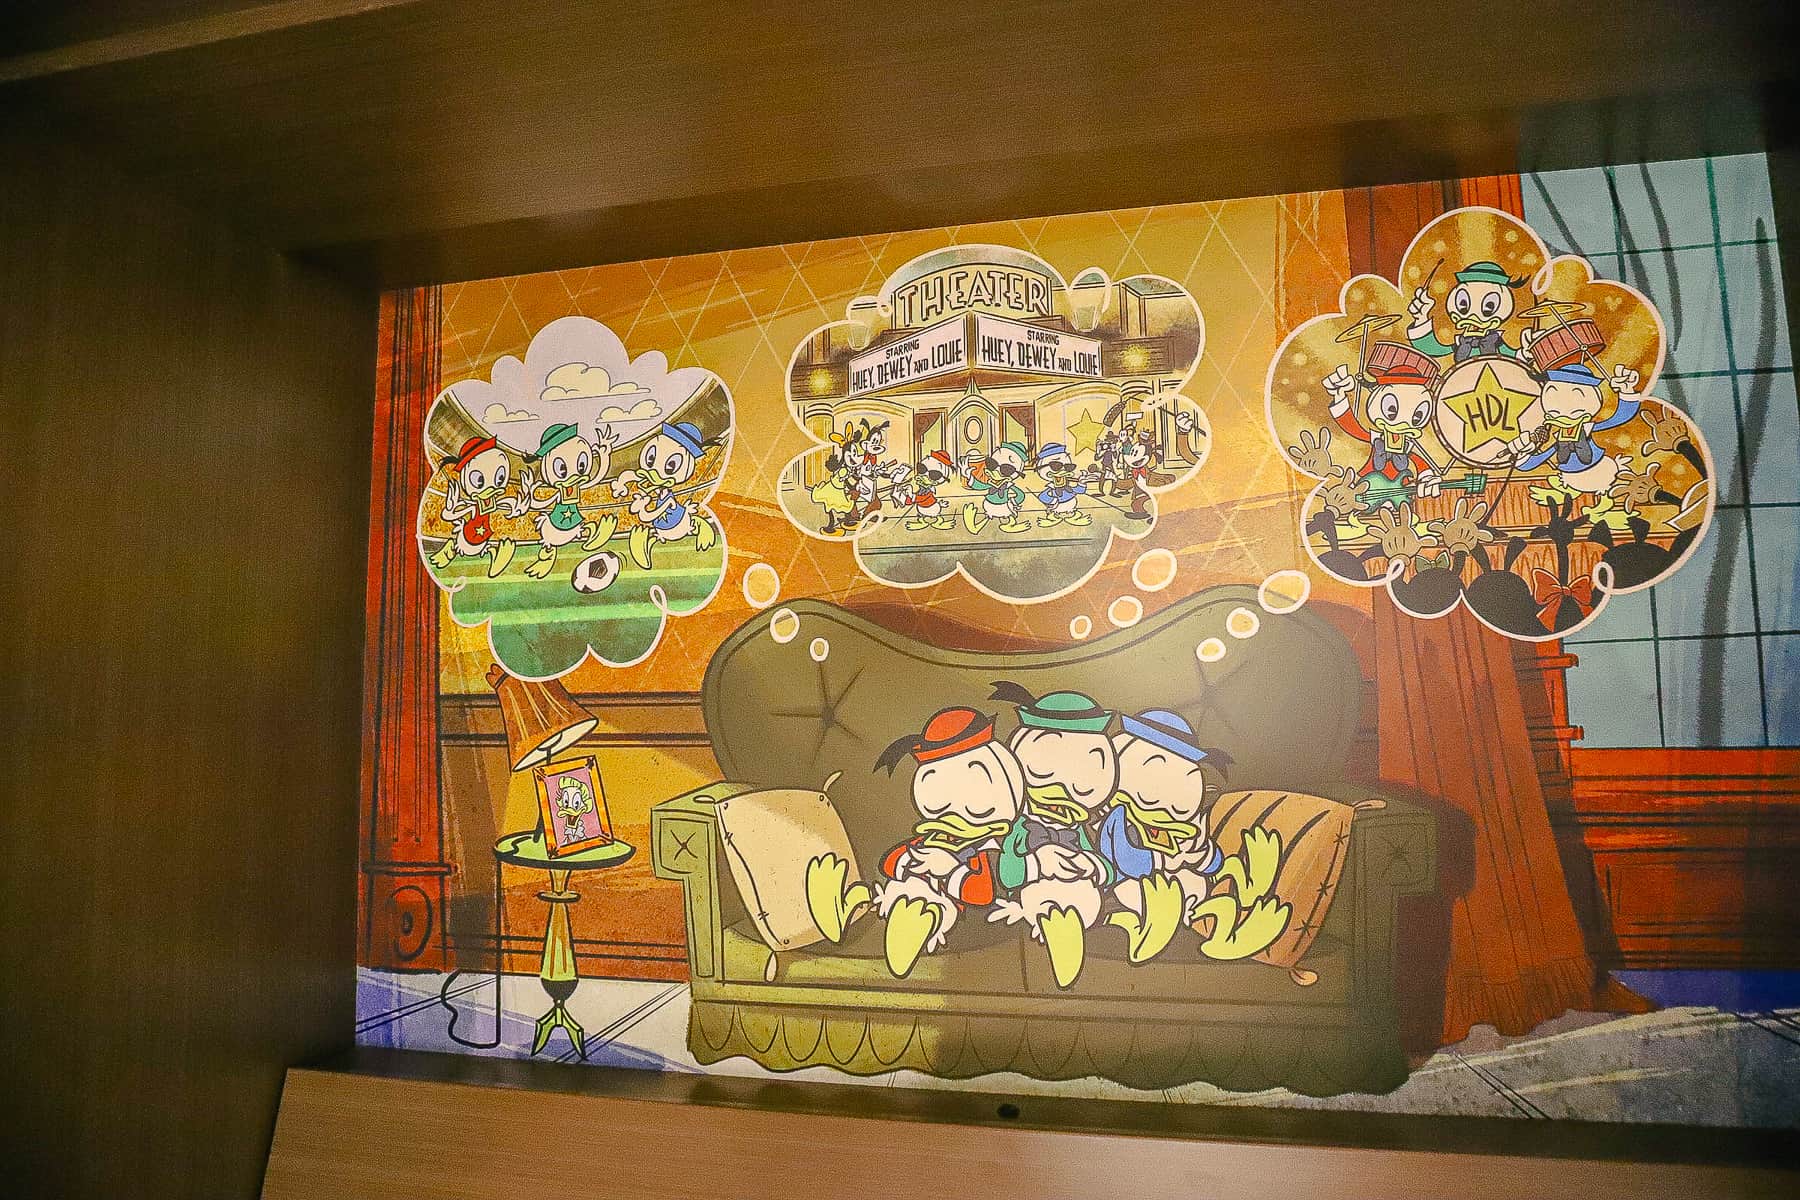 Donald Duck's nephews featured in the artwork above the table bed 